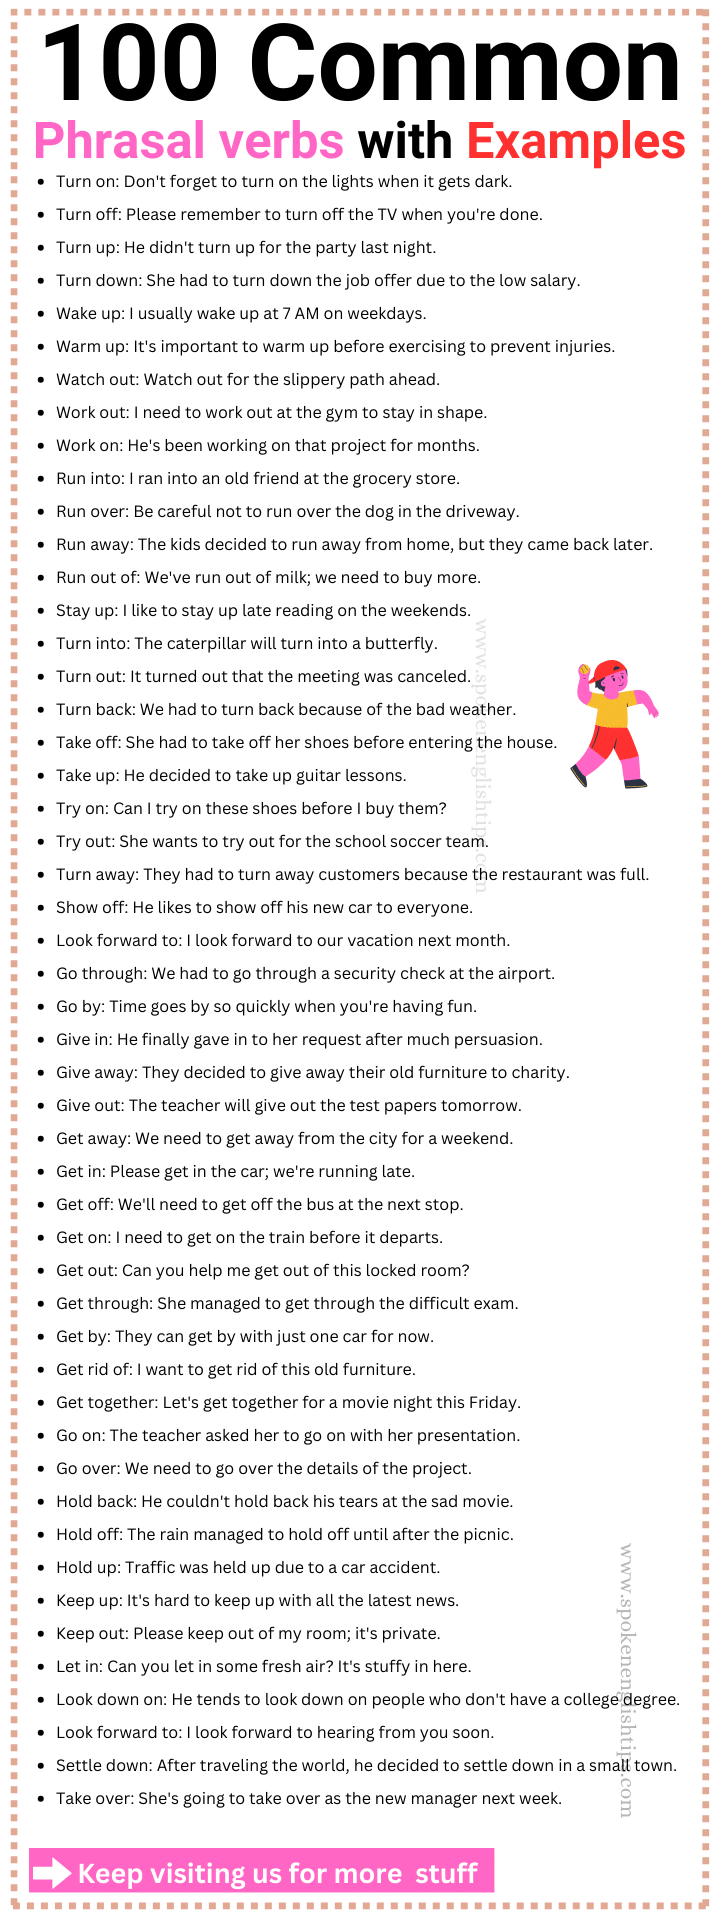 100 Common Phrasal verbs with Examples (2)